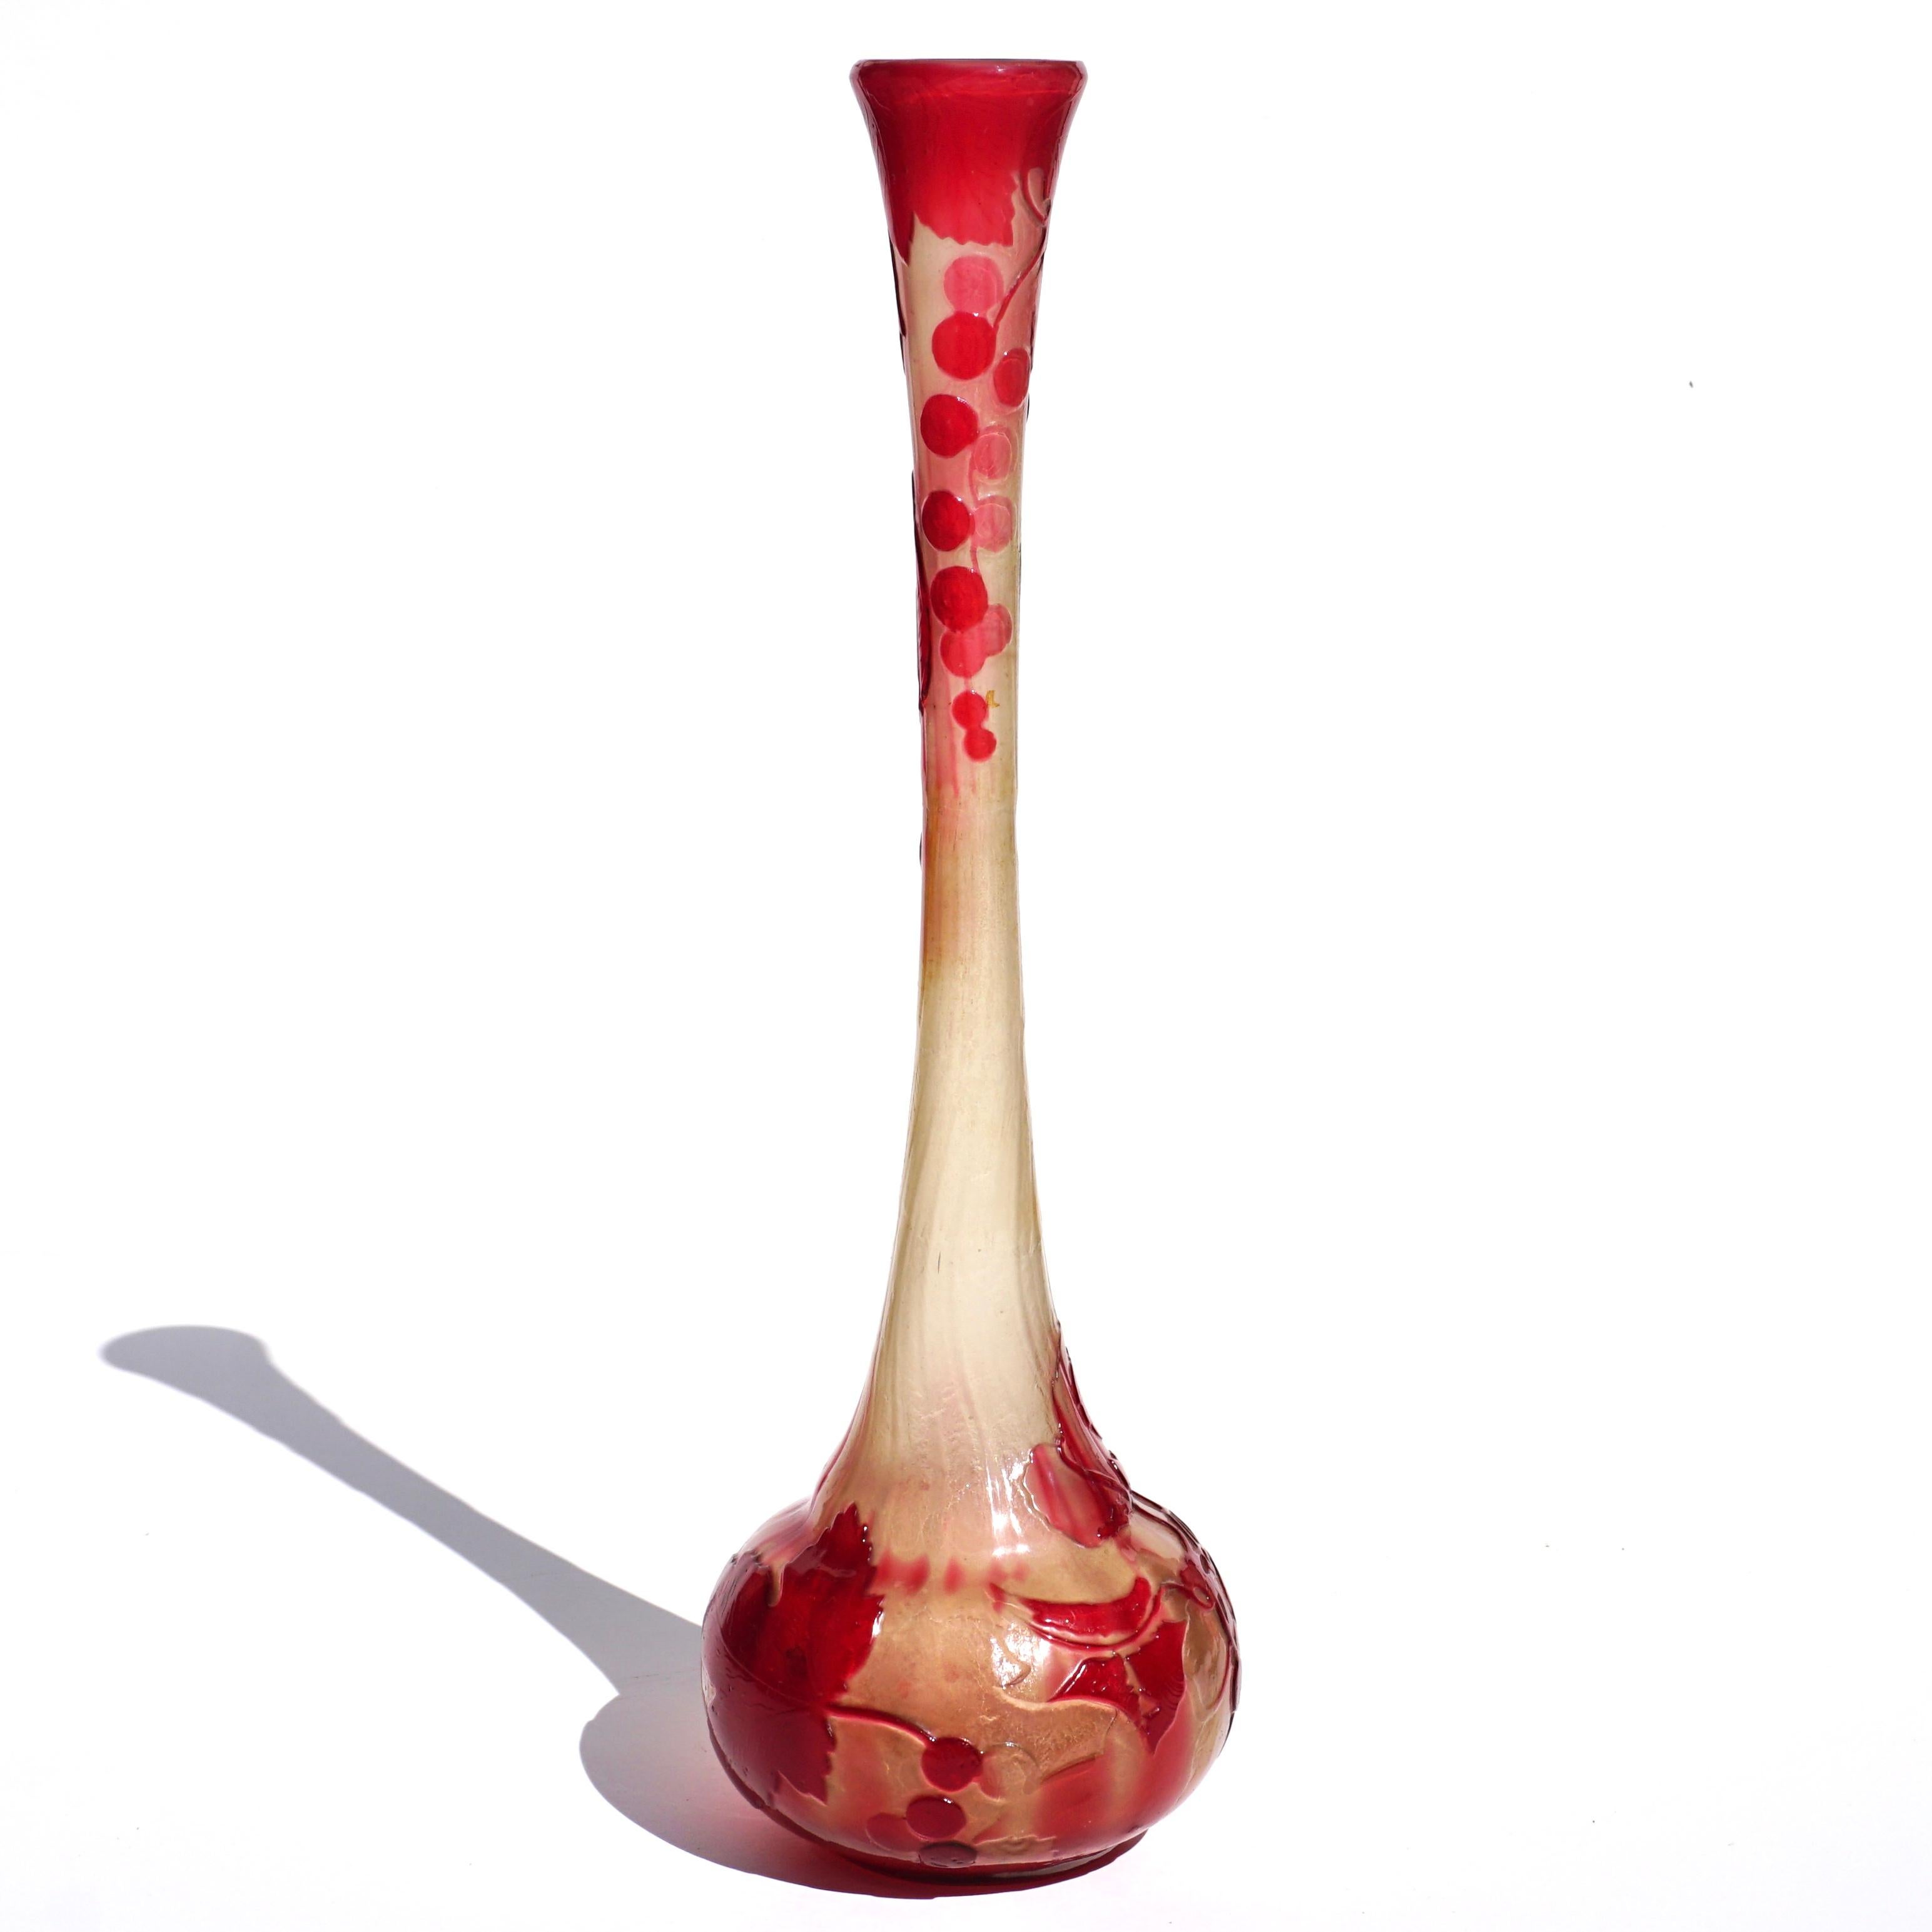 Tall Early Gallé Fire-Polished Cameo Glass Solifleur Vase, circa 1900

Signed: In Japonism script  “gallé”
Height: 12.4  inches (31.5 cm)
Tall vase with pendant redcurrants and foliage acid-etched in red overlay.
Condition:  In overall excellent